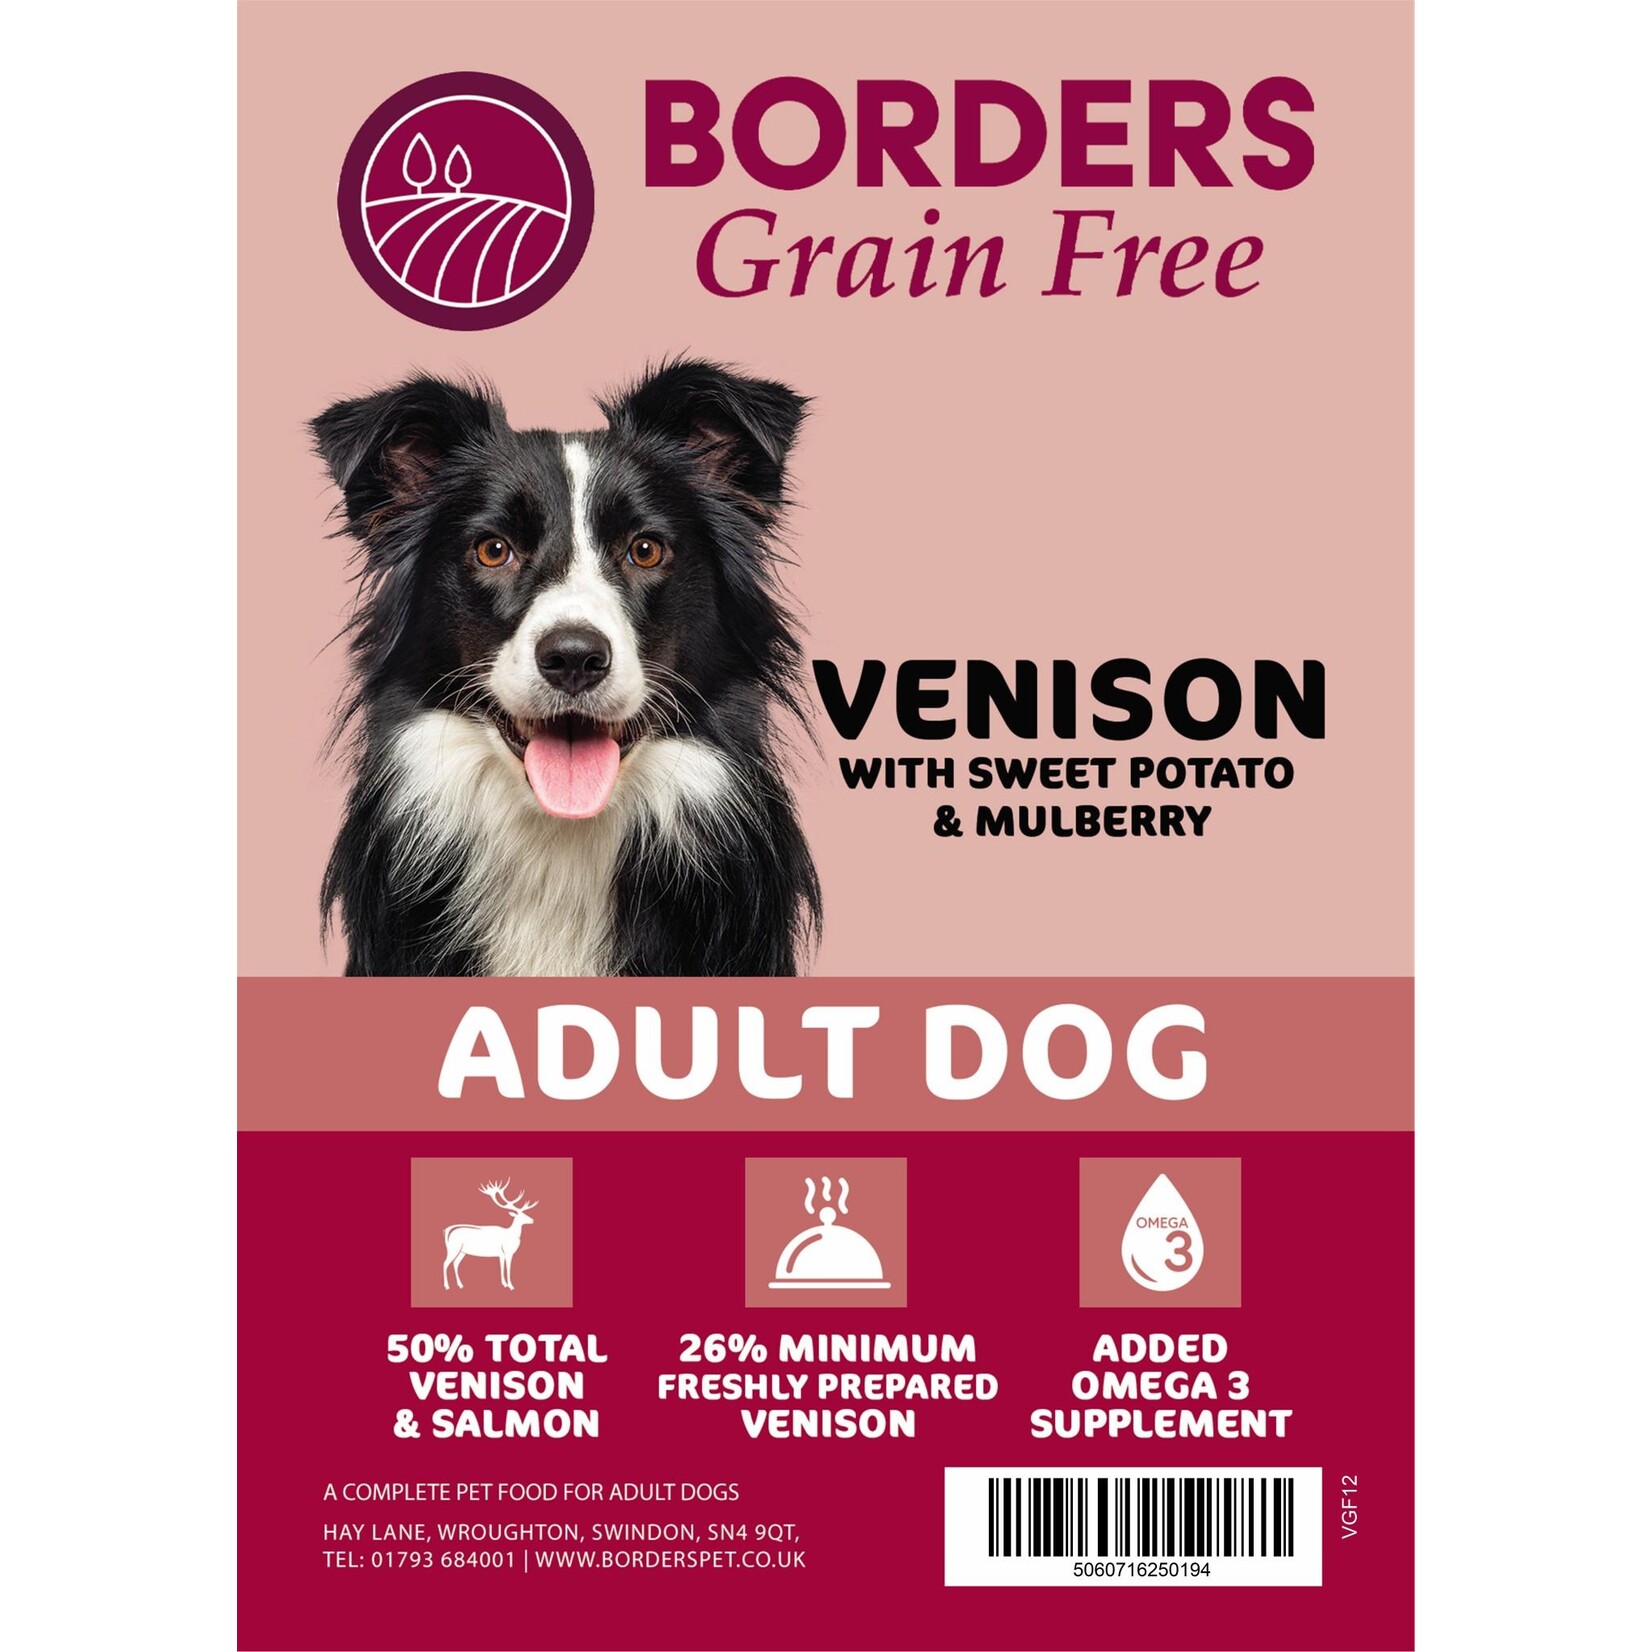 Borders Grain Free Adult Dog Dry Food with Venison, Sweet Potato & Mulberry